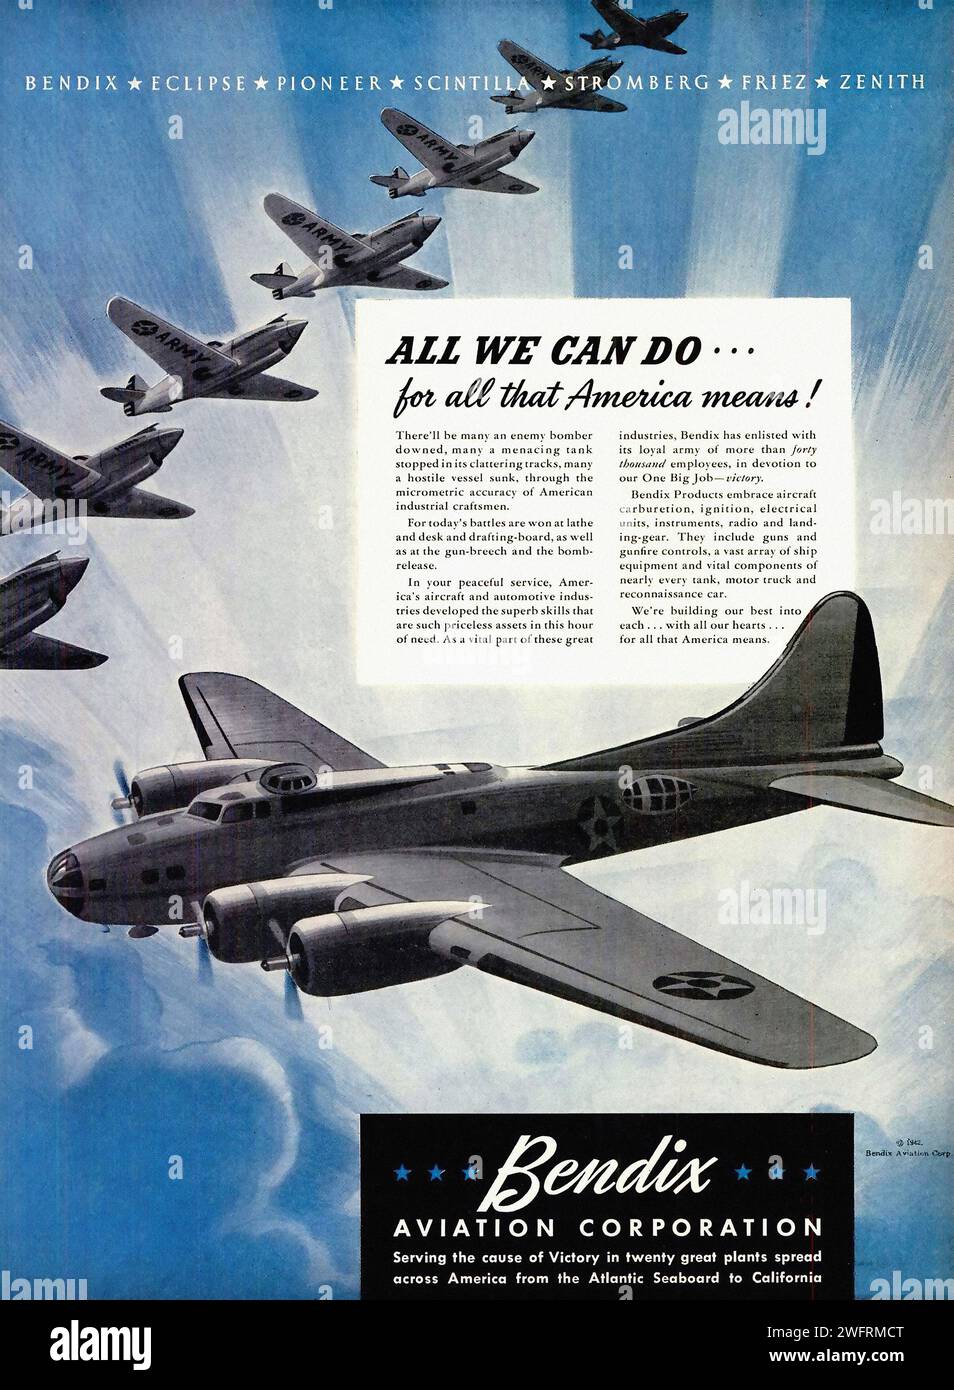 “ALL WE CAN DO… FOR ALL THAT AMERICA MEANS!”  This is a vintage American advertisement from the World War II era for Bendix Aviation Corporation. The advertisement features a striking black and white photograph of a fleet of Douglas DC-3 airplanes, a popular airliner of the time, flying over a cloudy sky. The image is set against a blue background, with a white text box containing black text that reads “All we can do… for all that America means!”. The text box also lists companies that are part of Bendix Aviation Corporation. The Bendix Aviation Corporation logo, a white circle with a blue “B” Stock Photo